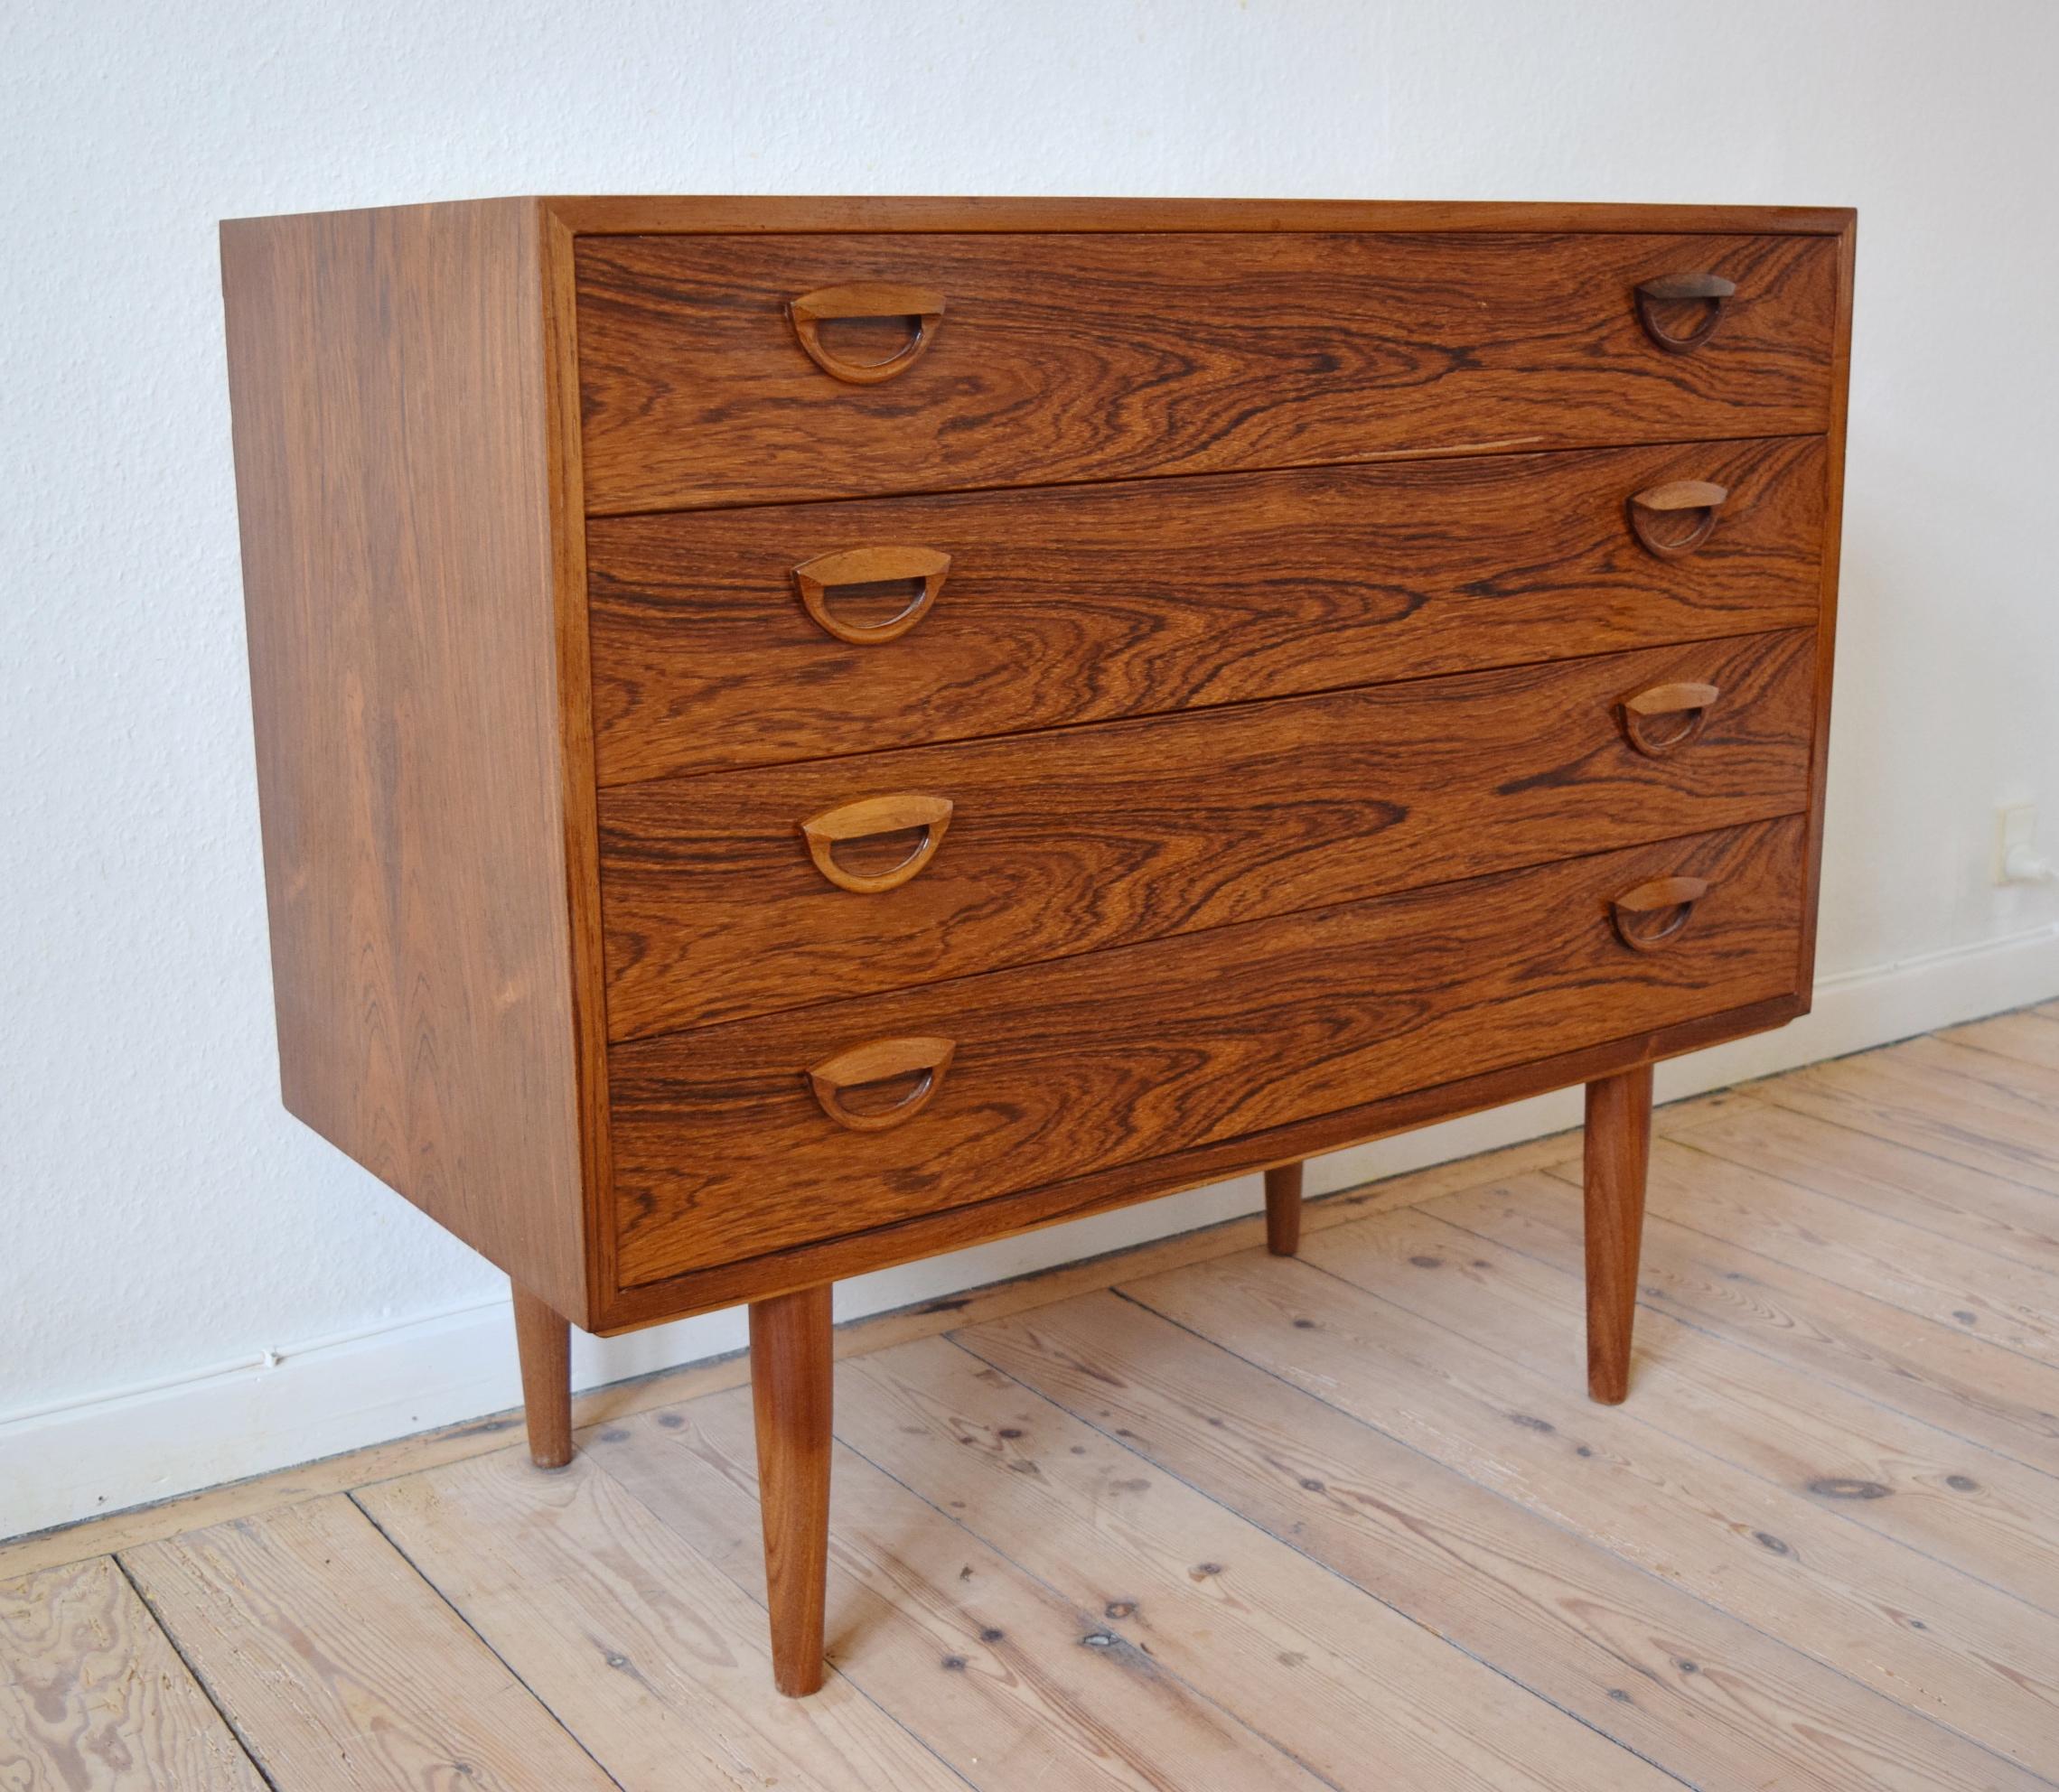 Danish rosewood chest designed by Kai Kristiansen and manufactured by Feldballes Møbelfabrik in the 1960s. It features Kai Kristiansen's signature recessed drawer pulls and sits on turned and tapered legs. Labelled by manufacturer on rear.